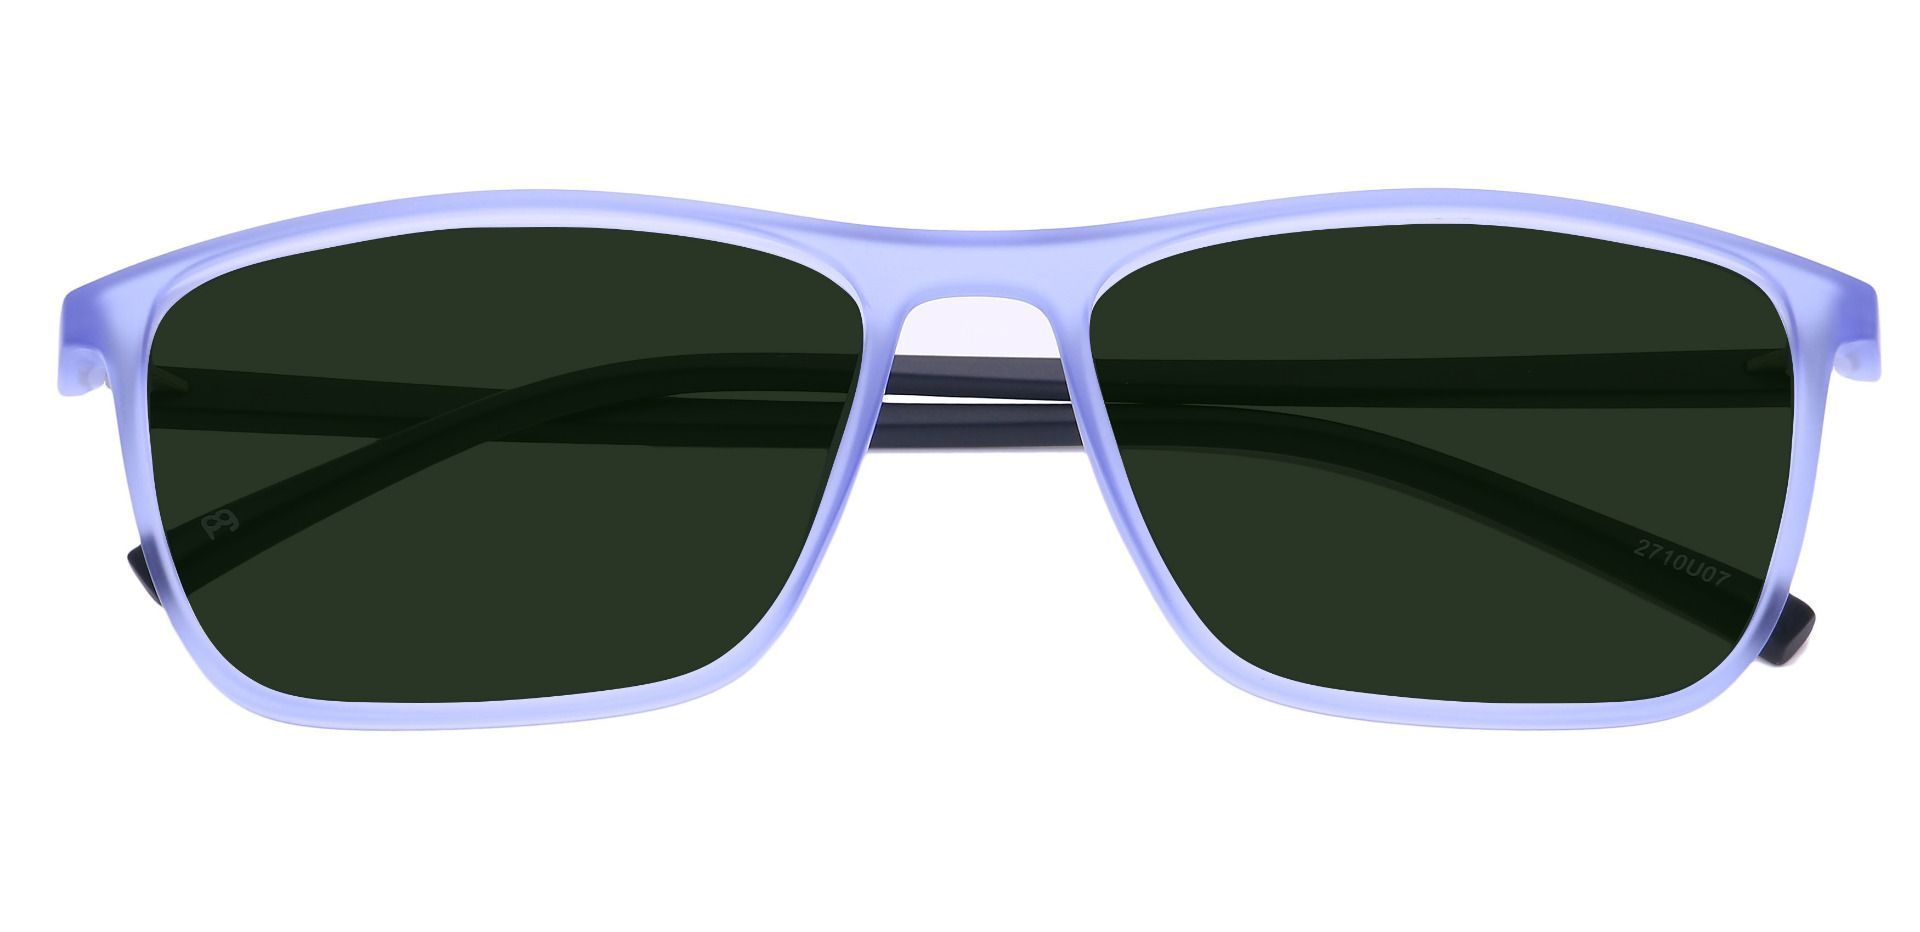 Candid Rectangle Non-Rx Sunglasses - Blue Frame With Green Lenses